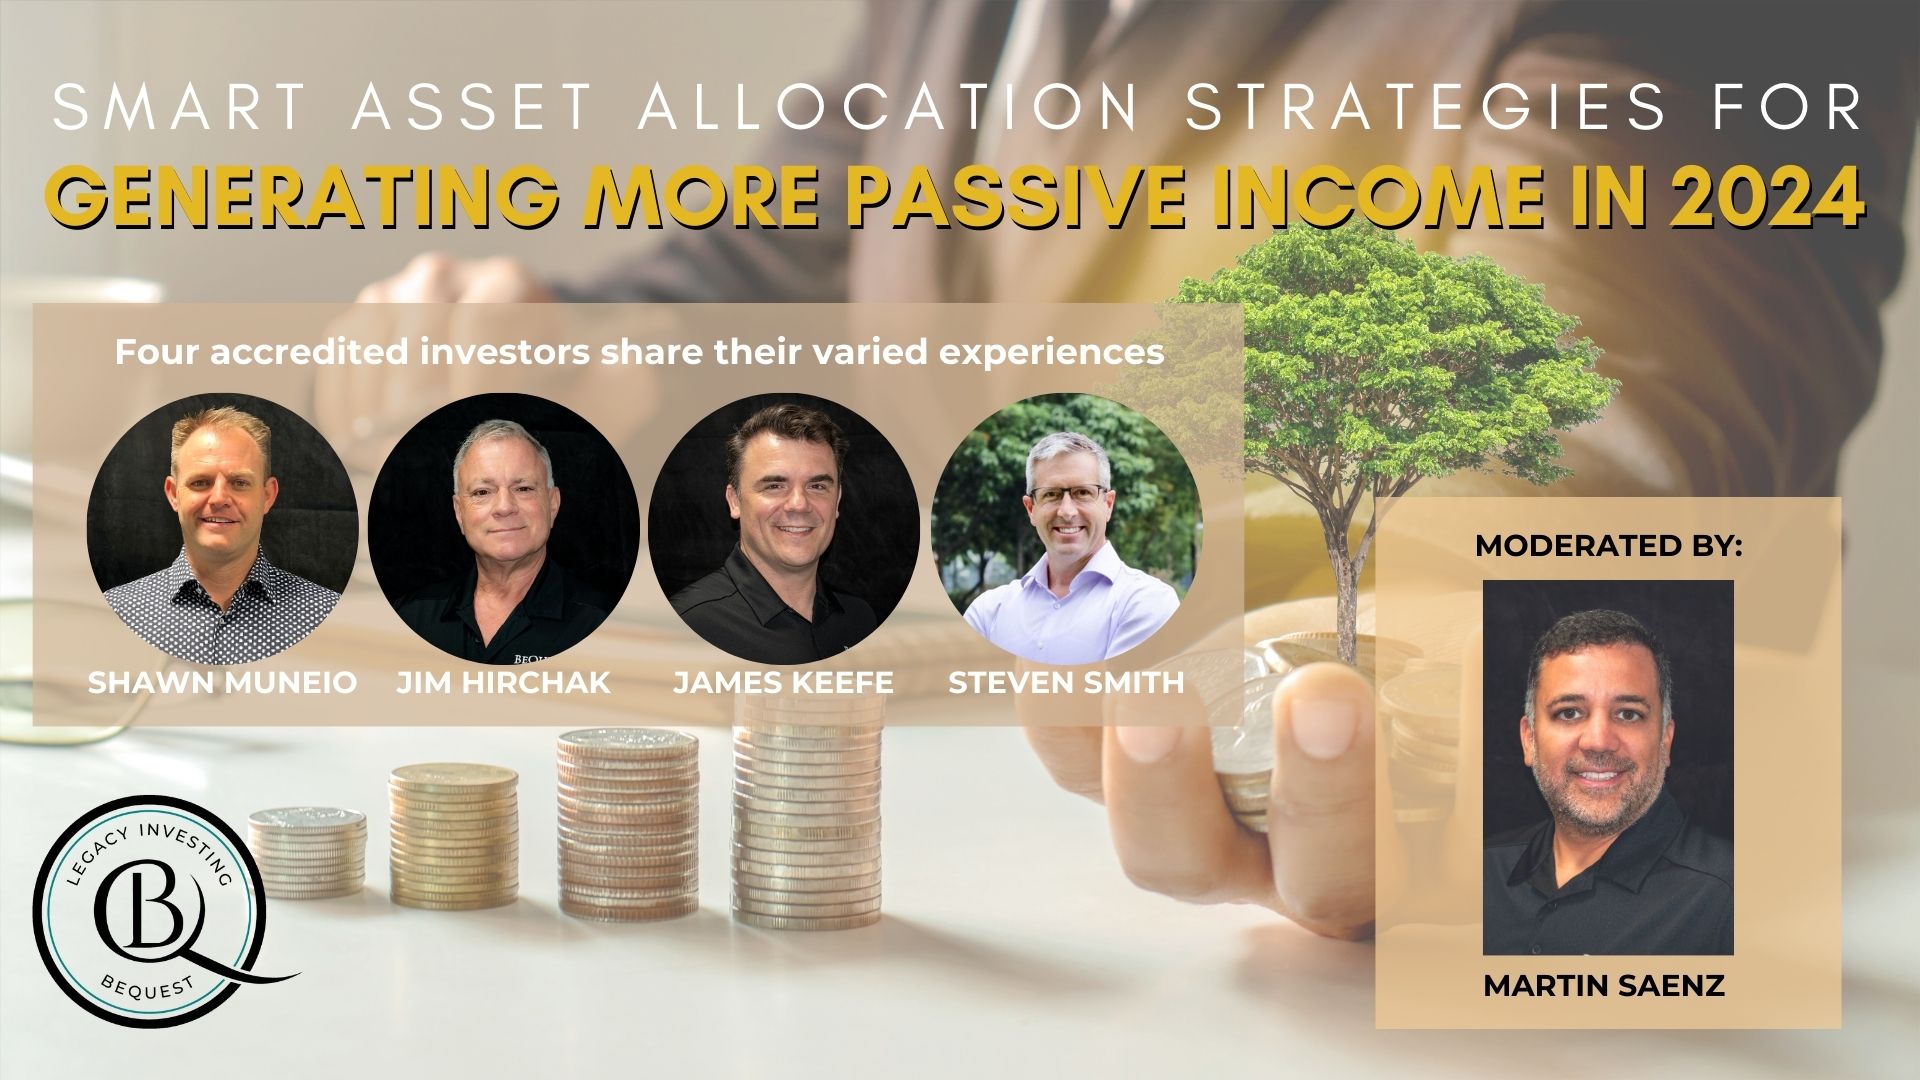 Smart Asset Allocation Strategies for 2024